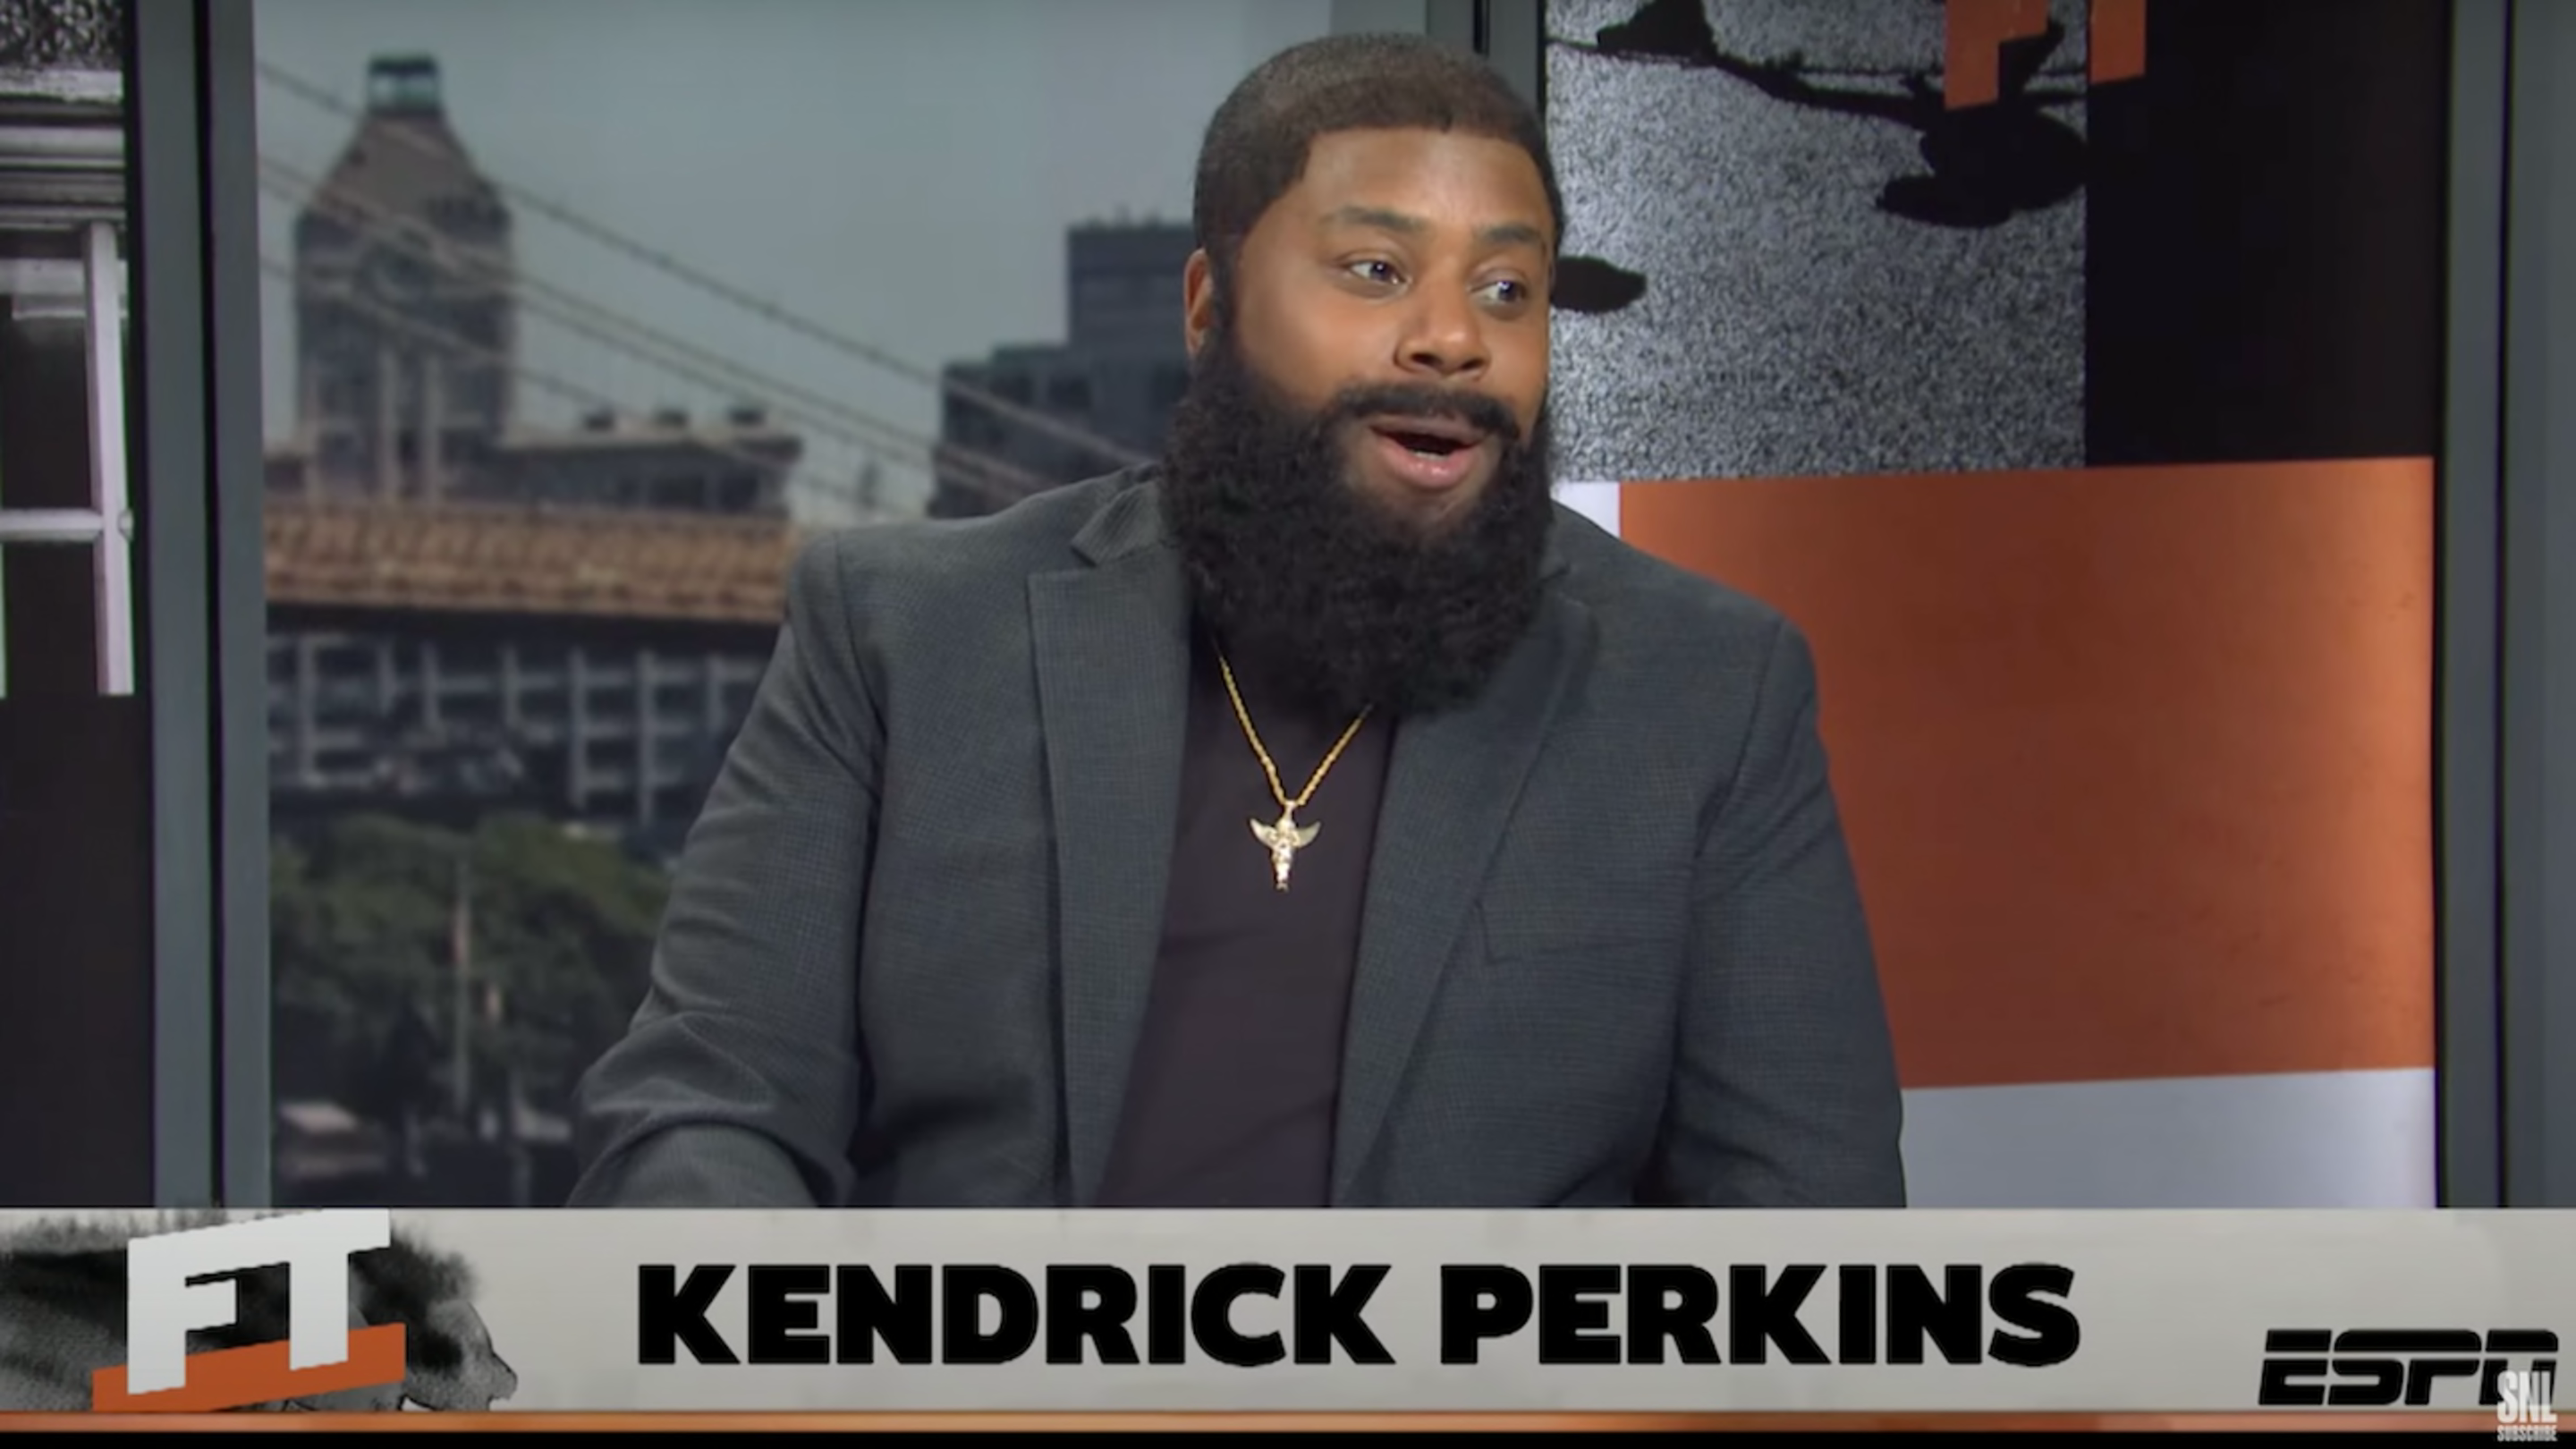 Keenan Thompson Nailed Kendrick Perkins in 'SNL' 'First Take' Sketch
That Was Cut For Time